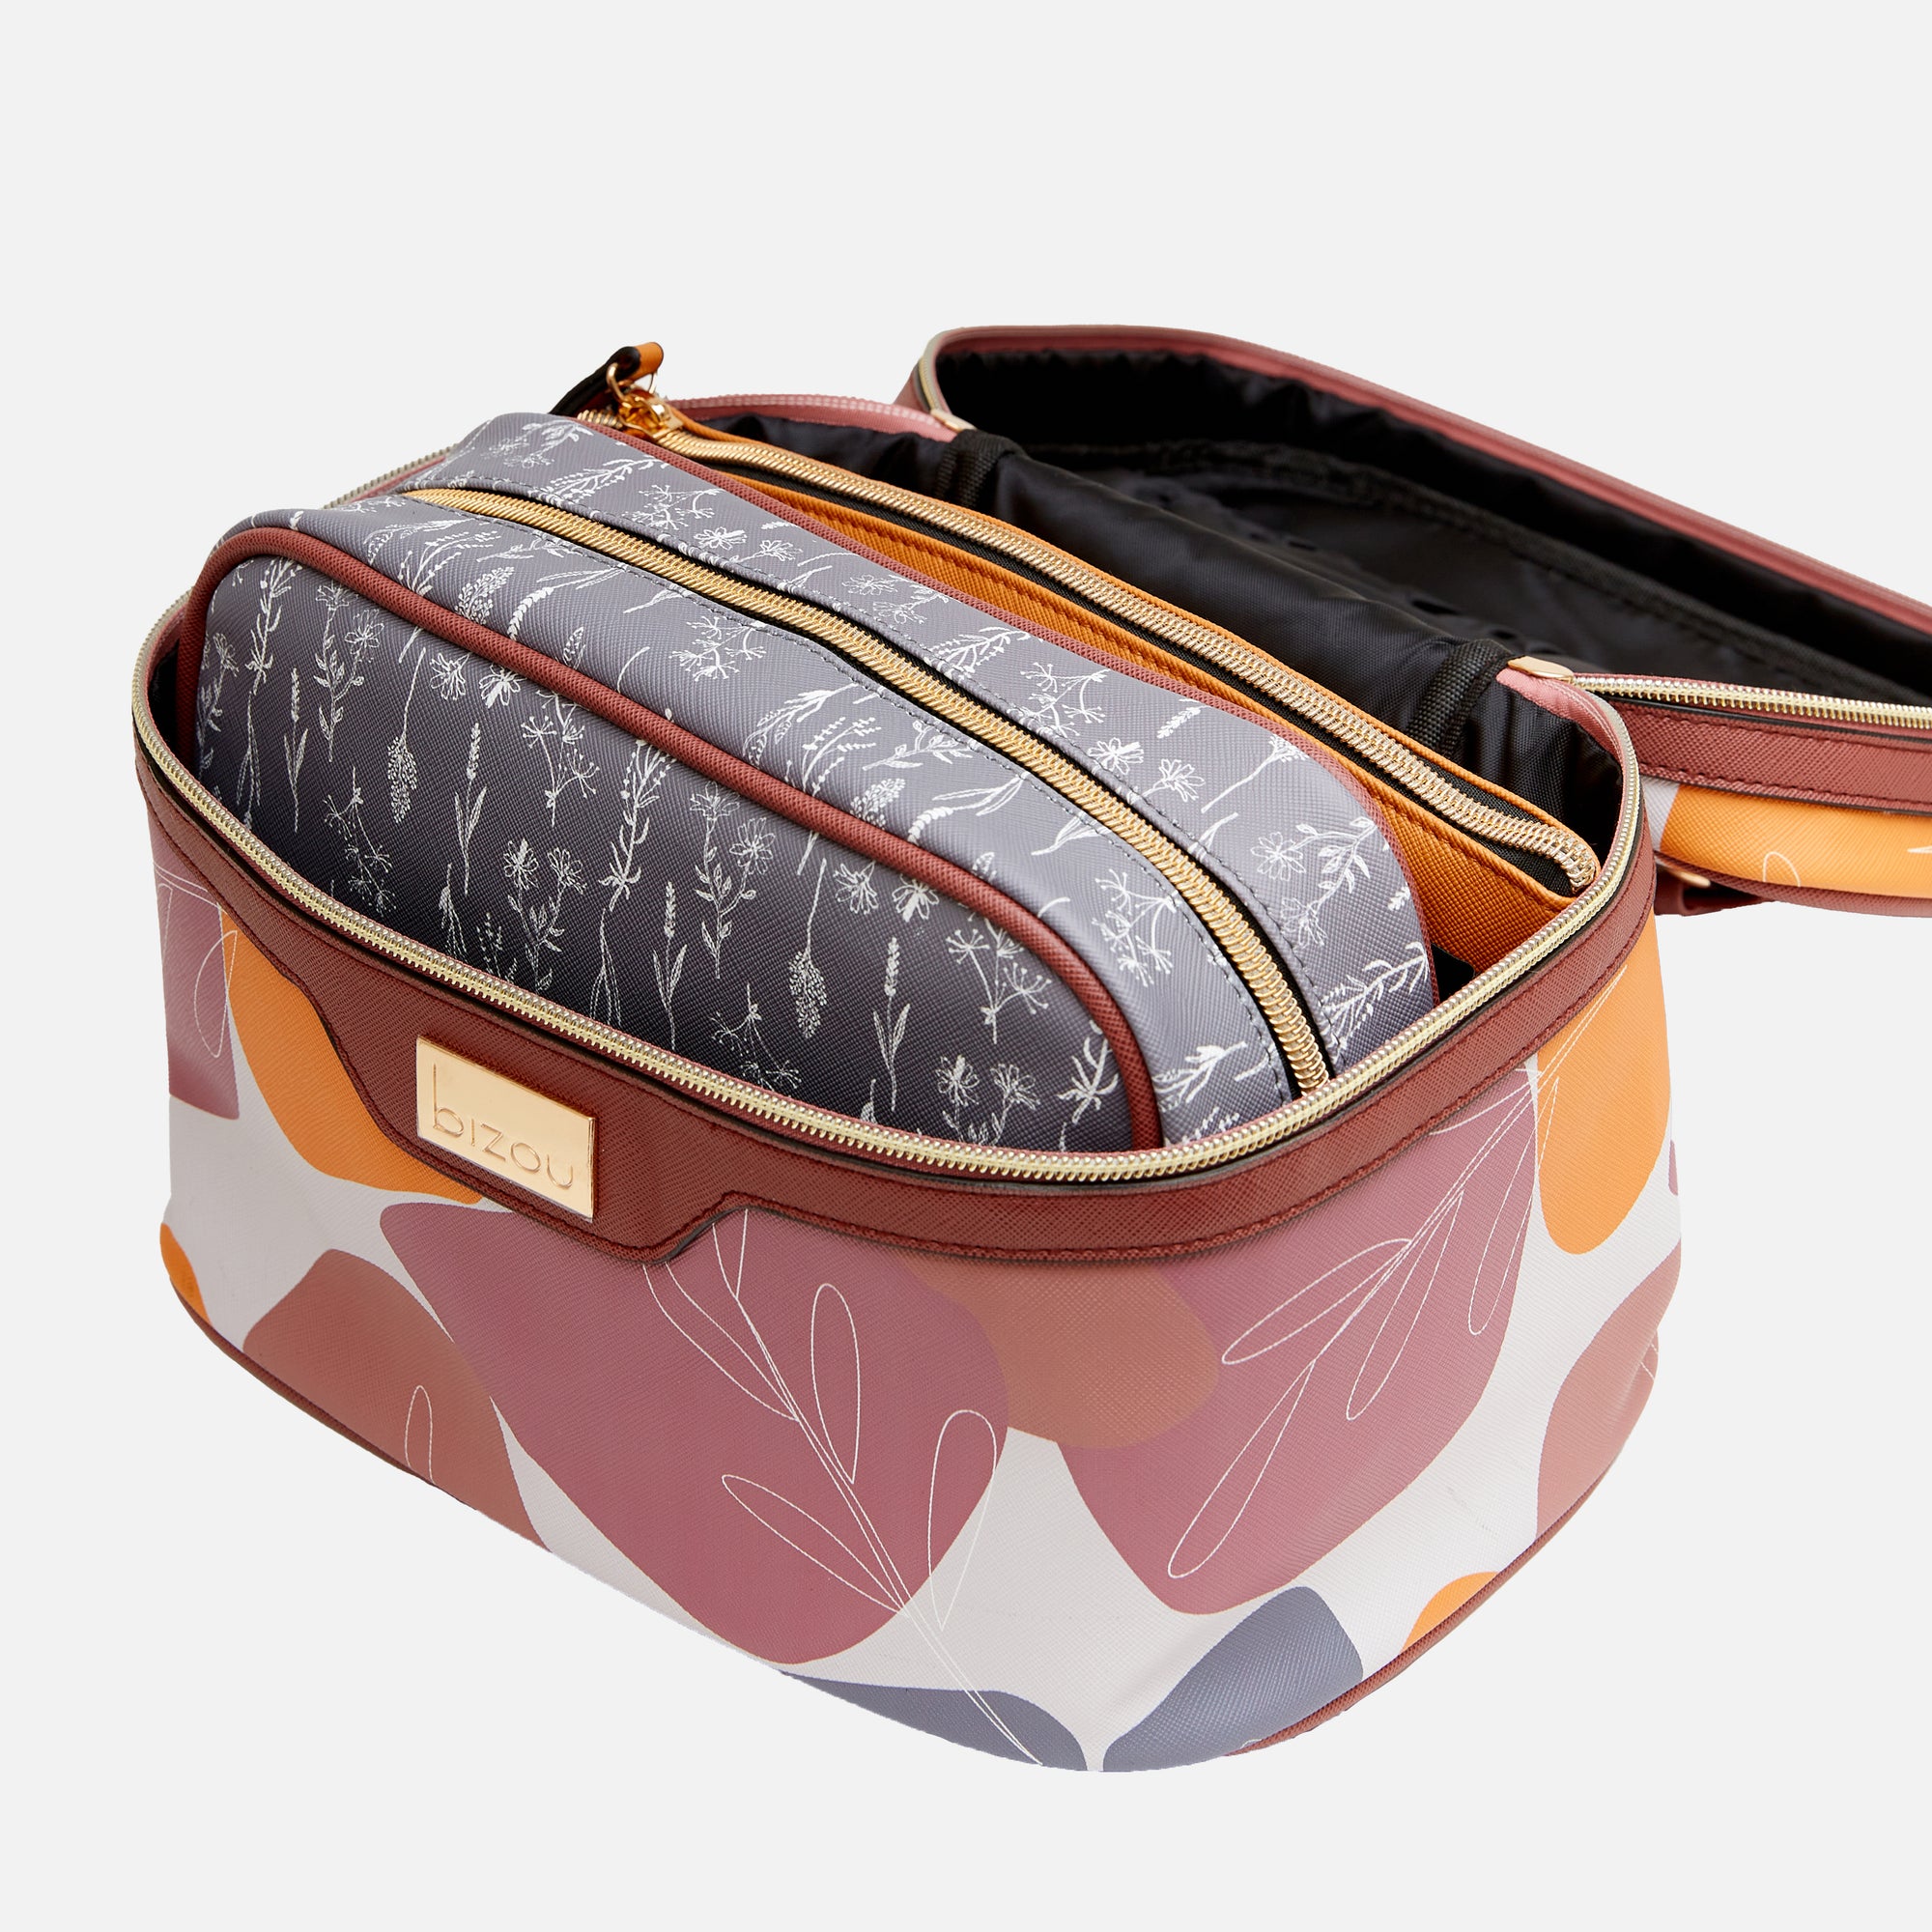 3 in 1 cosmetic pouch with leaves and abstract pattern